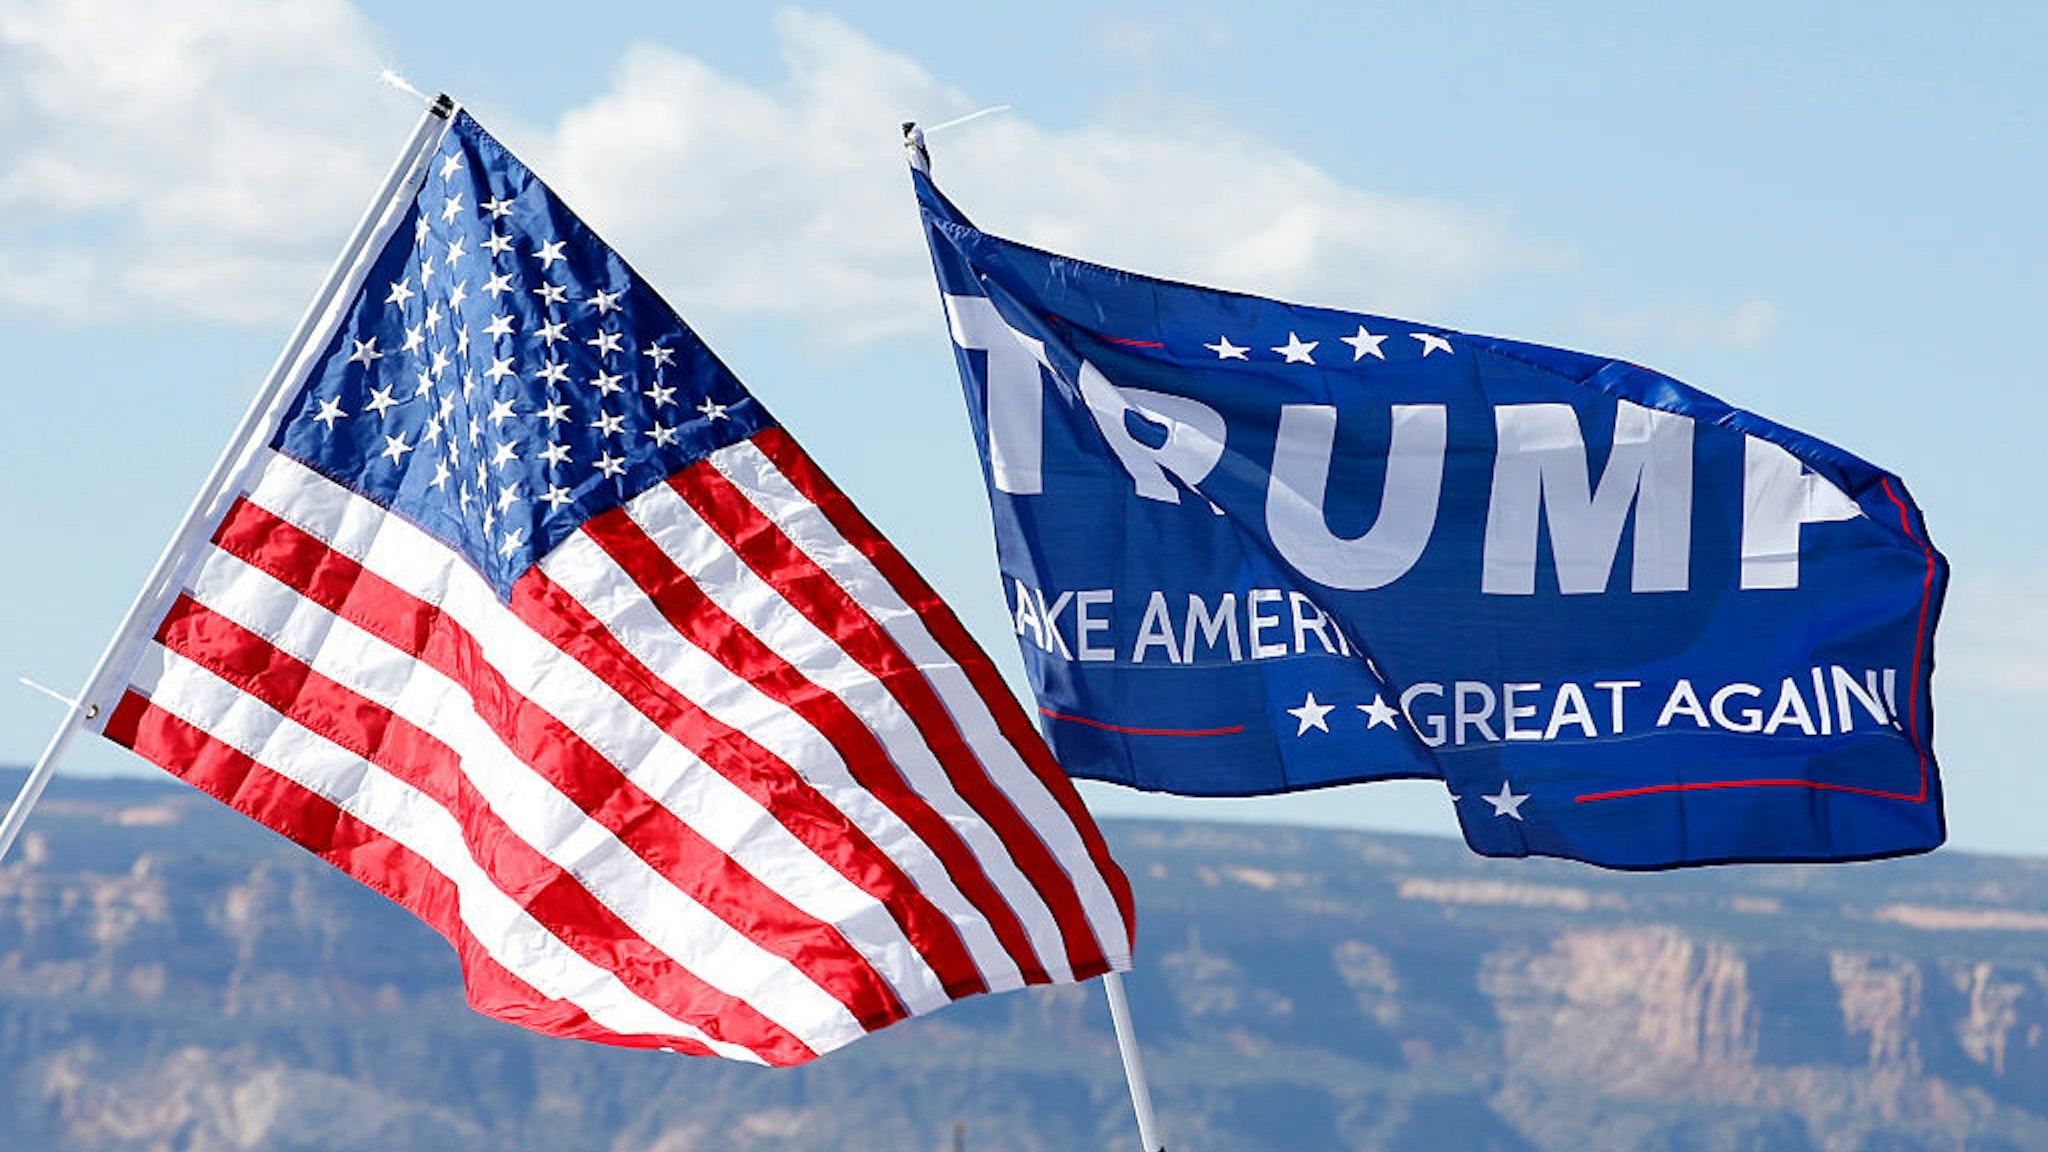 GRAND JUNCTION, CO - OCTOBER 18: With the Colorado National Monument in the background, an American flag and a Trump flag flies at a rally where Republican Presidential Candidate Donald Trump will speak on October 18, 2016 in Grand Junction, Colorado. Trump is on his way to Las Vegas for the third and final presidential debate against Democratic presidential candidate Hillary Clinton. (Photo by George Frey/Getty Images